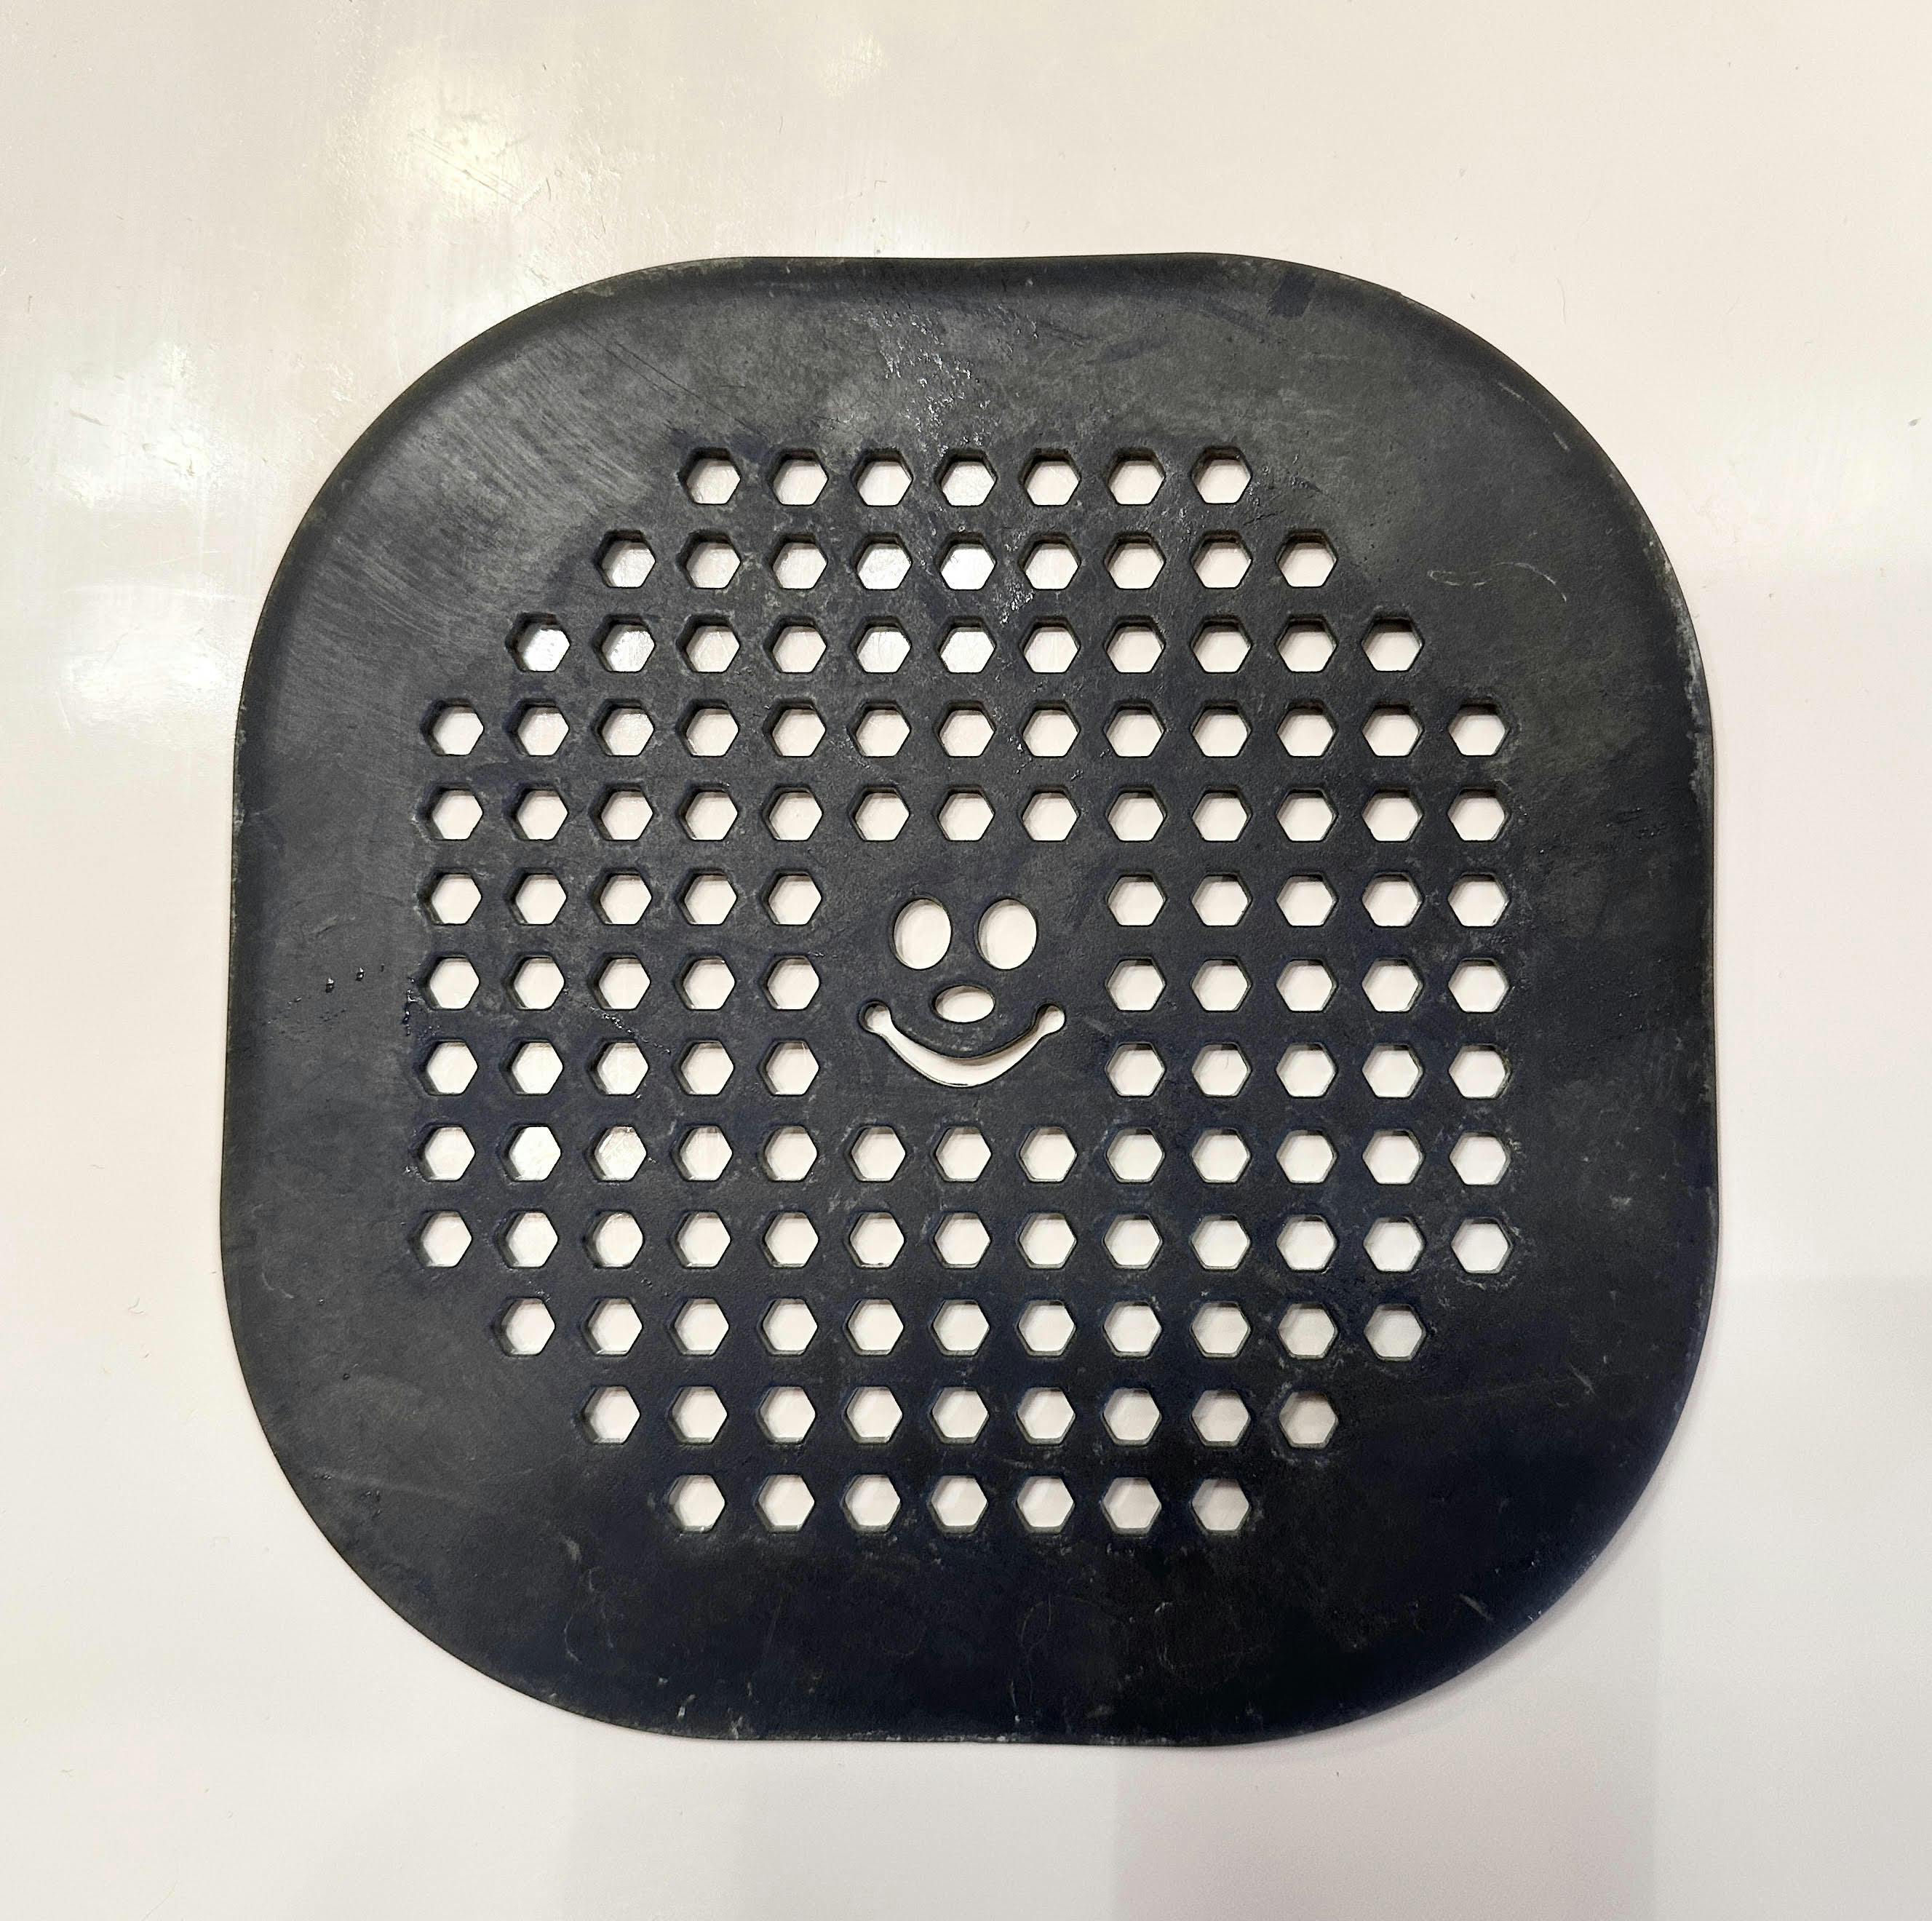 photo of a drain cover whose central holes make a happy face